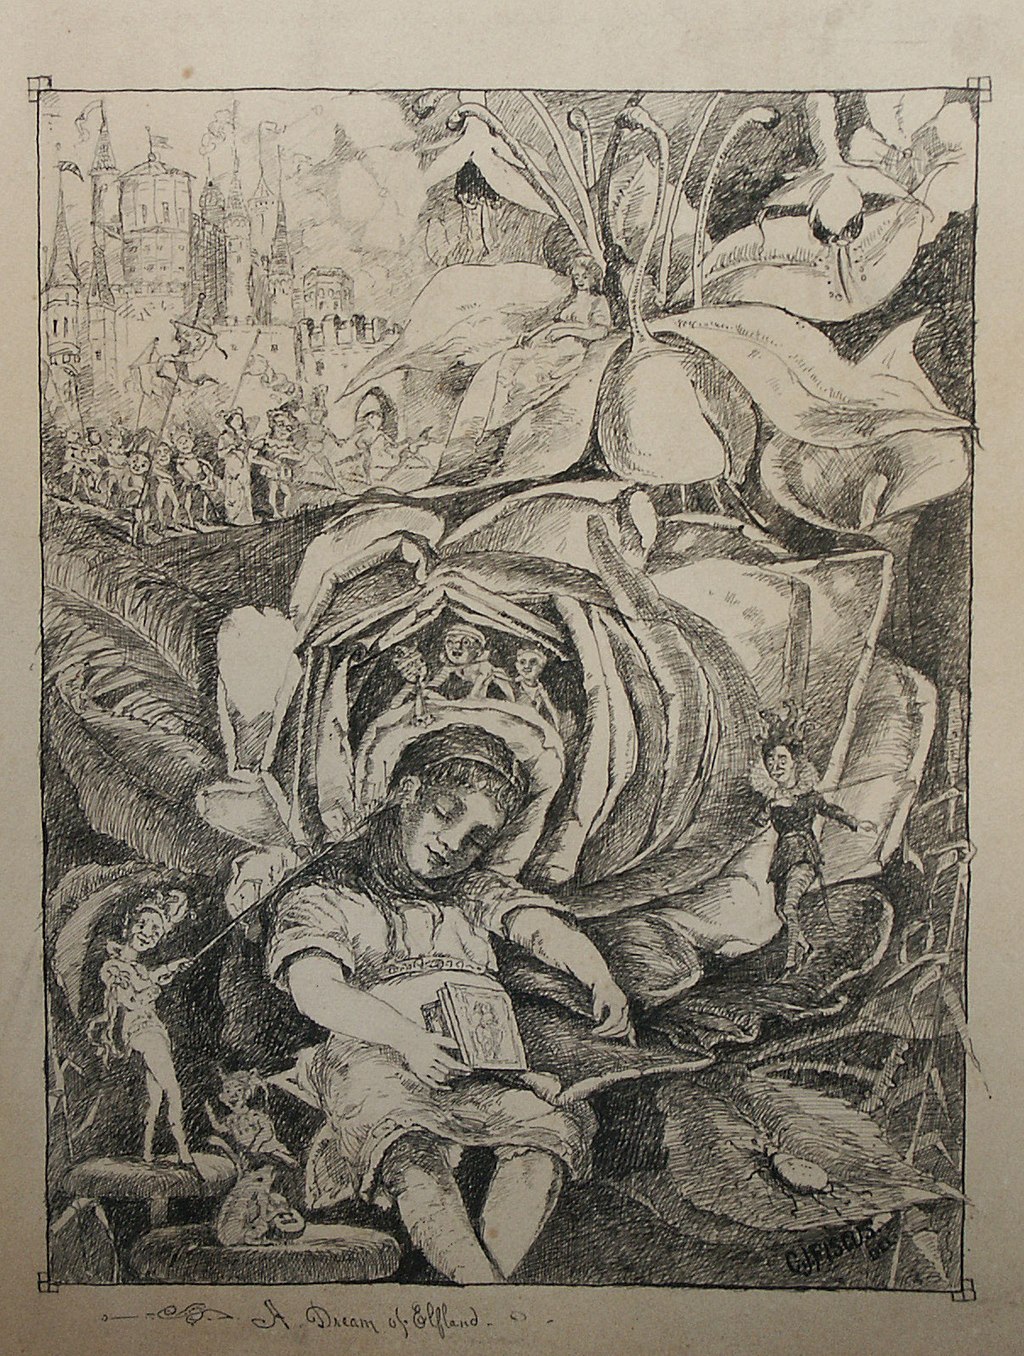 A pen and ink drawing of a child asleep nestled in a flower with small elves all around her and a castle with streaming pennants in the background.